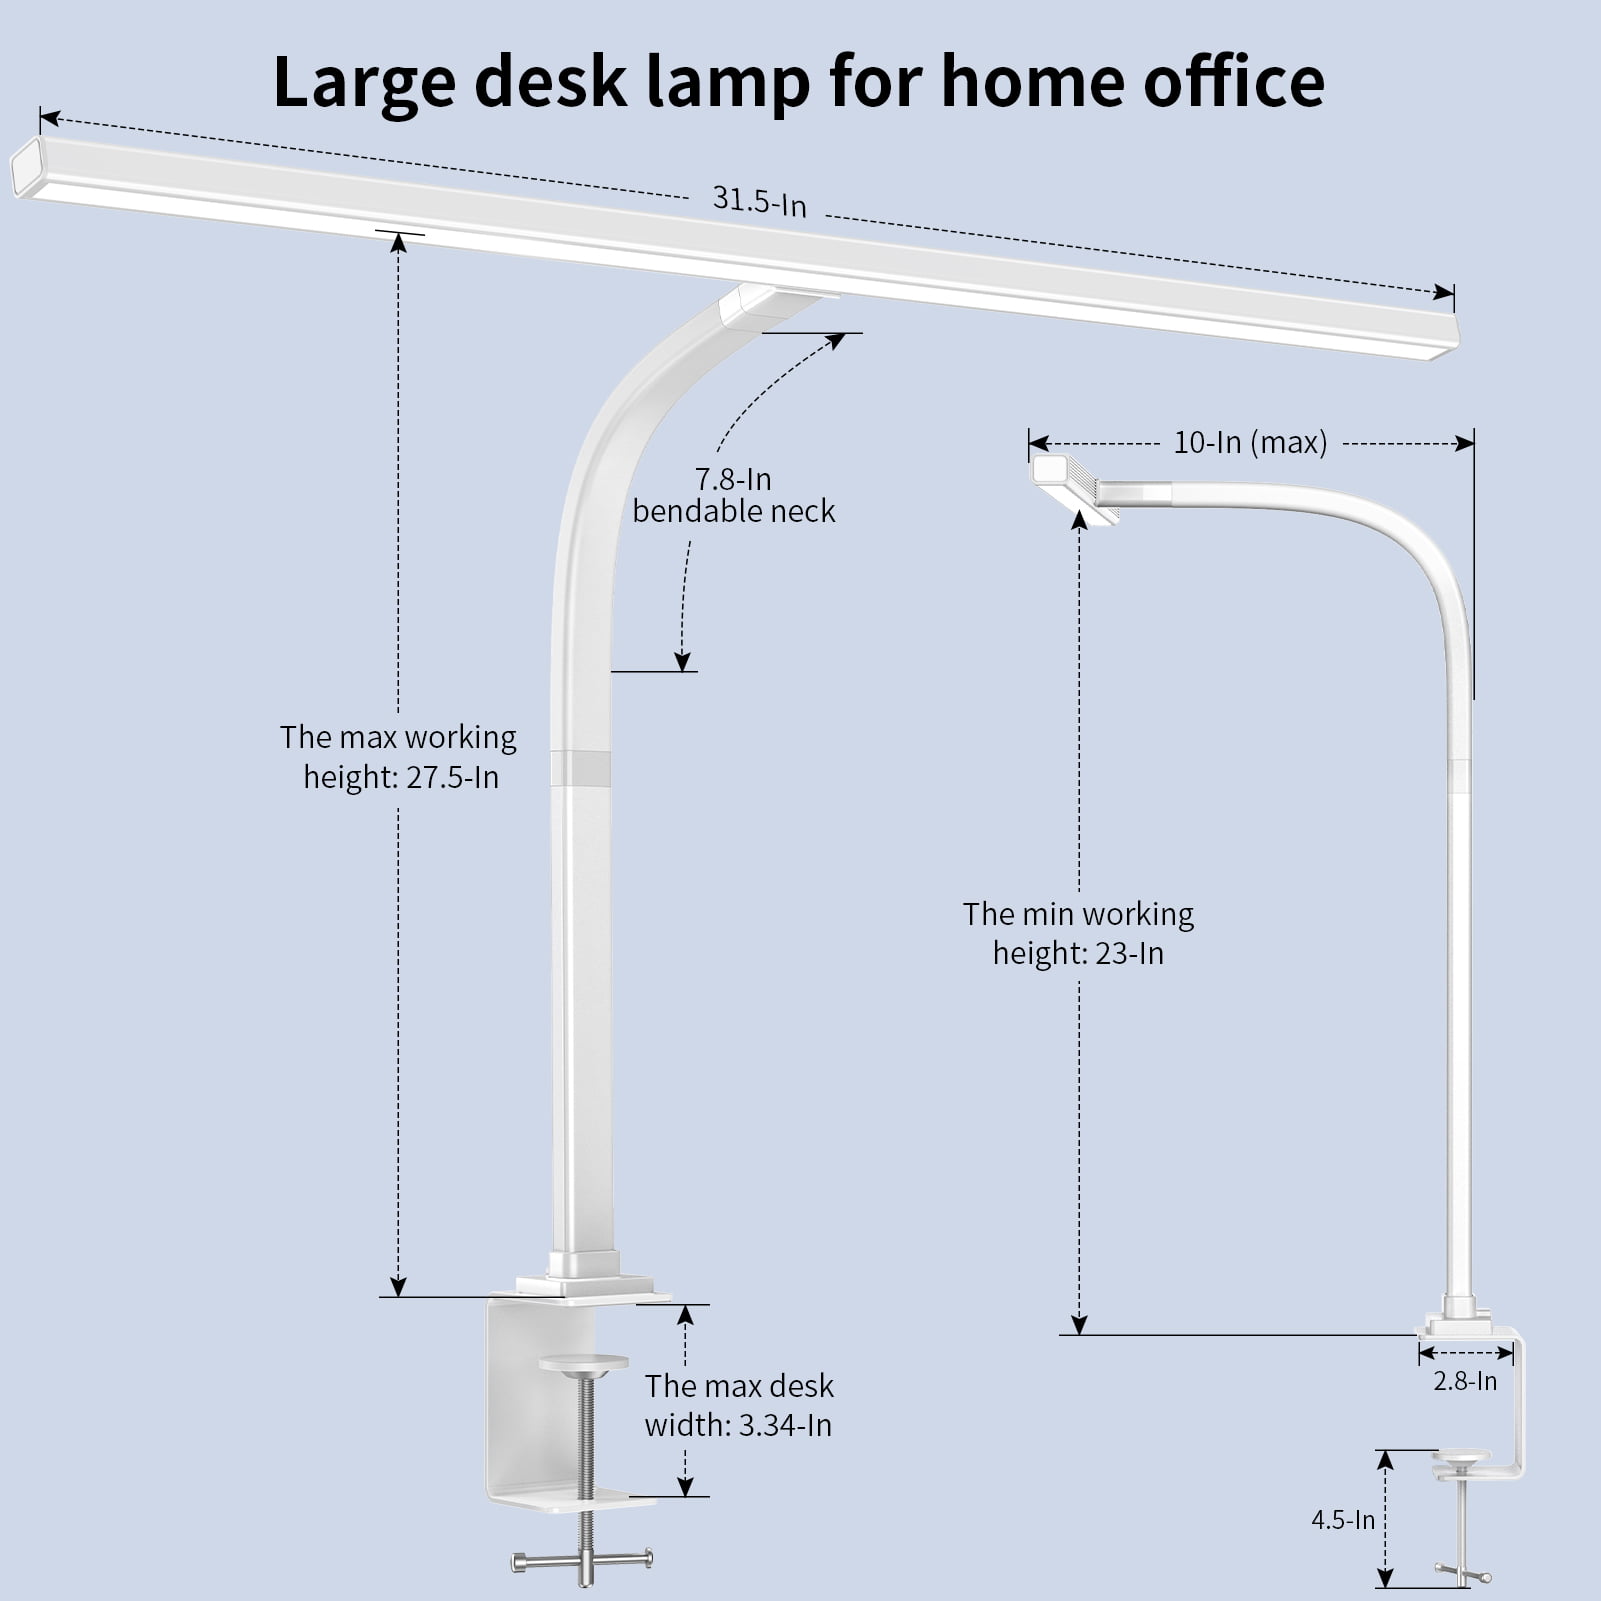 sandiea LED Desk Lamp for Home Office - 24W Bright Double Head Desk Light  with Clamp Eye Caring Architect Task Light 25 Lighting Modes Adjustable